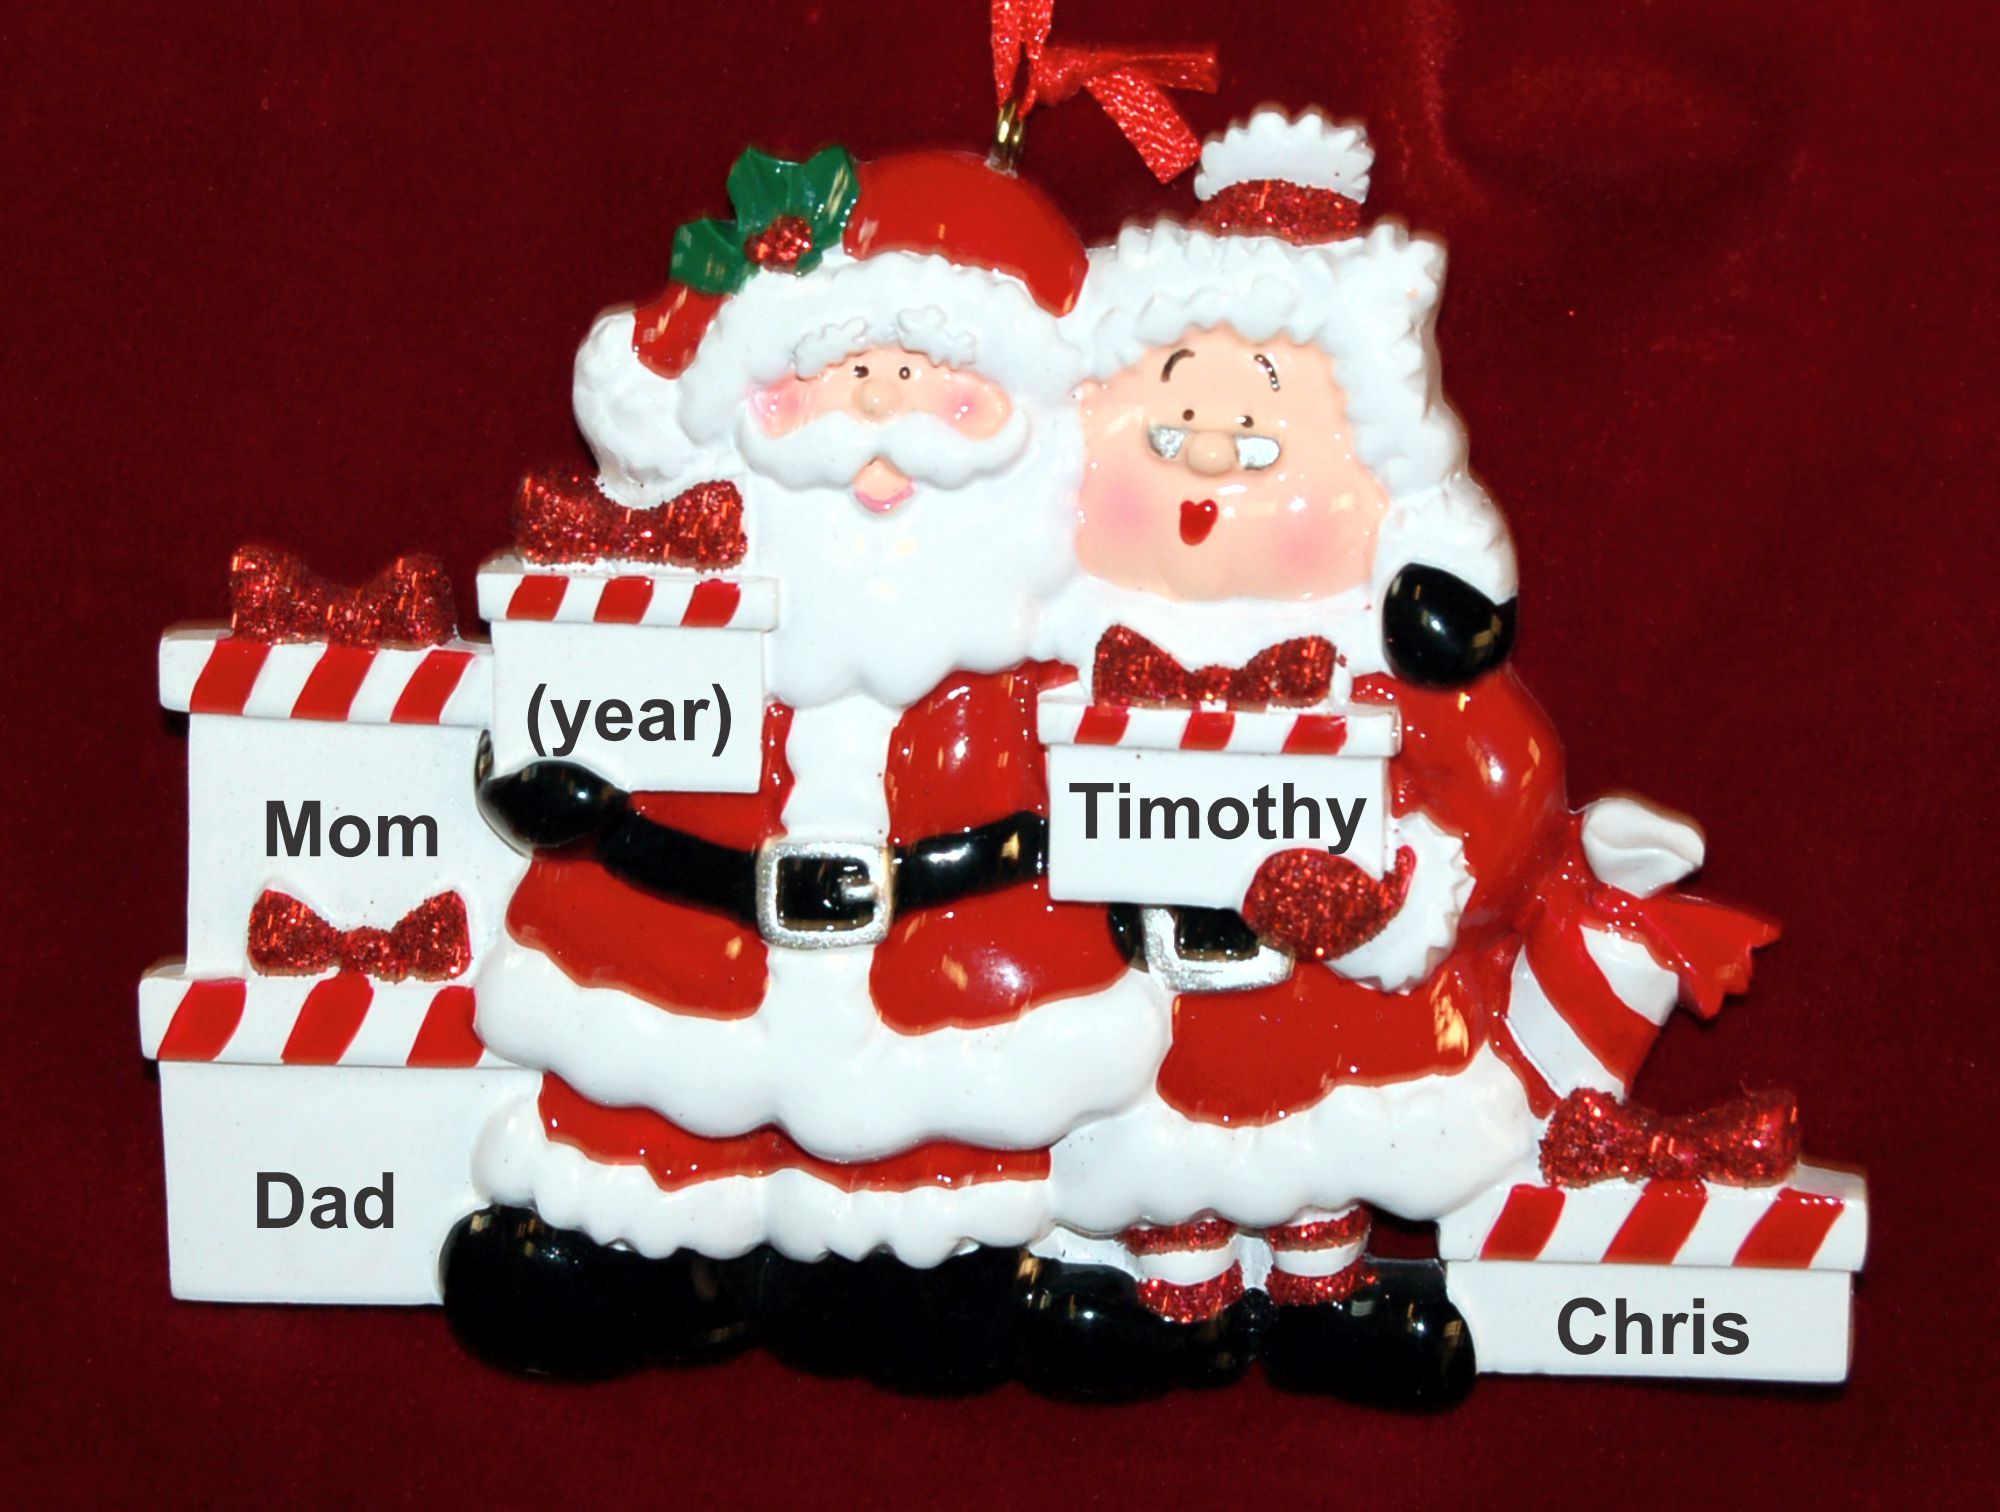 Family Christmas Ornament Xmas Presents for 4 Personalized by RussellRhodes.com